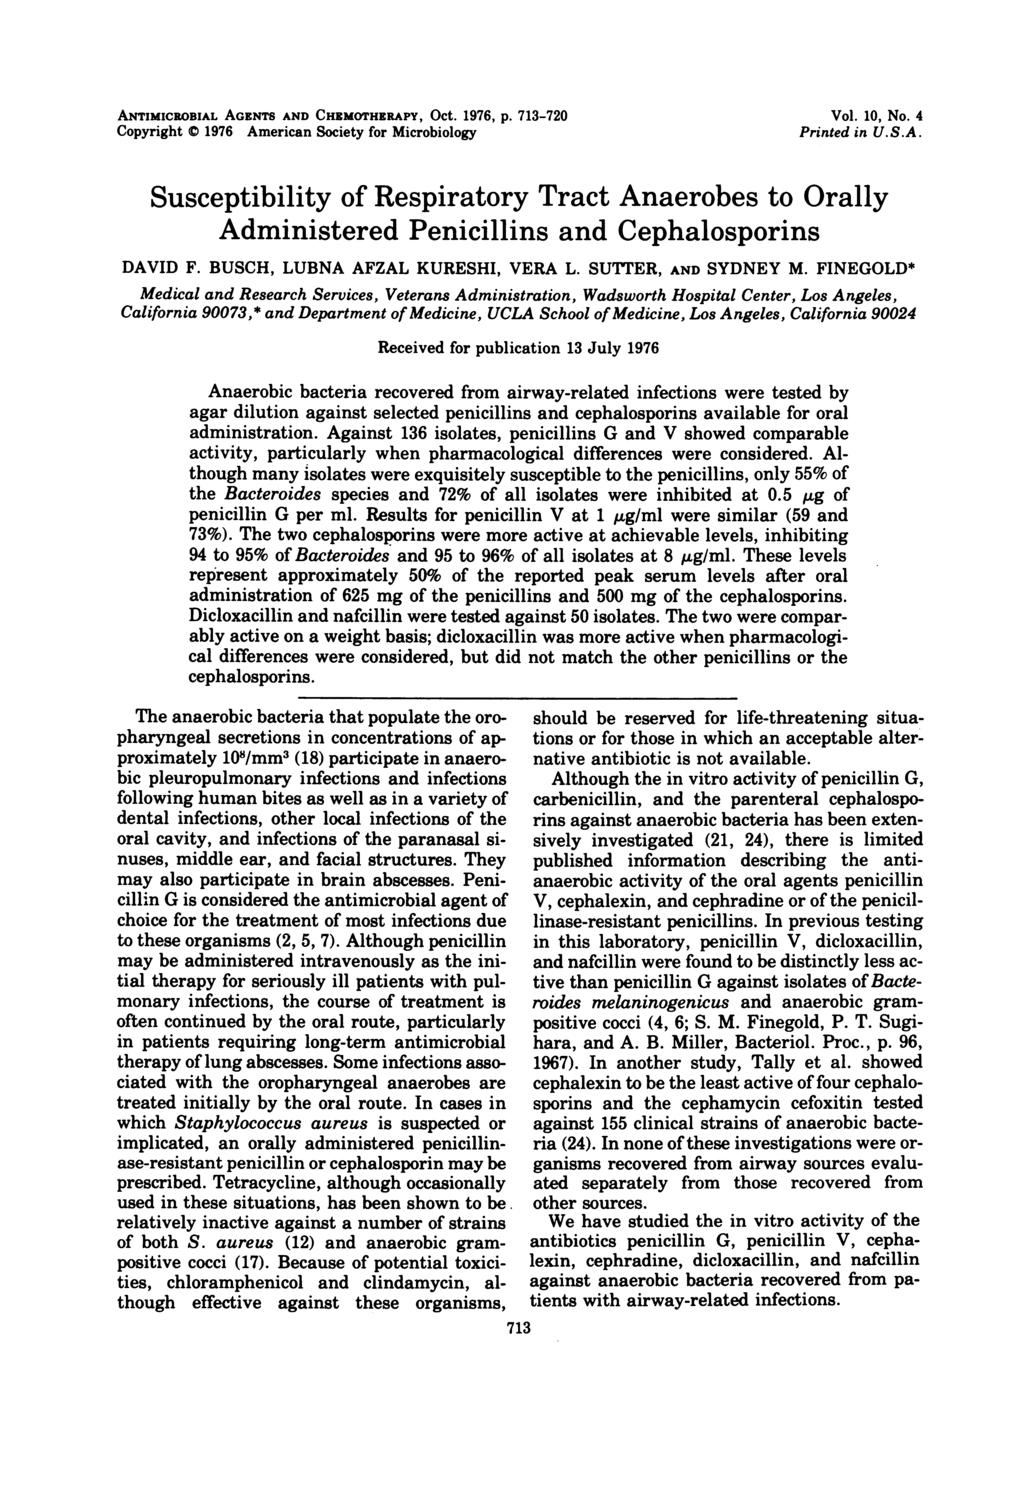 ANTIMICROBIAL AGENTS AND CHEMOTHERAPY, Oct. 1976, p. 713-720 Copyright 0 1976 American Society for Microbiology Vol. 10, No. 4 Printed in U.S.A. Susceptibility of Respiratory Tract Anaerobes to Orally Administered Penicillins and Cephalosporins DAVID F.